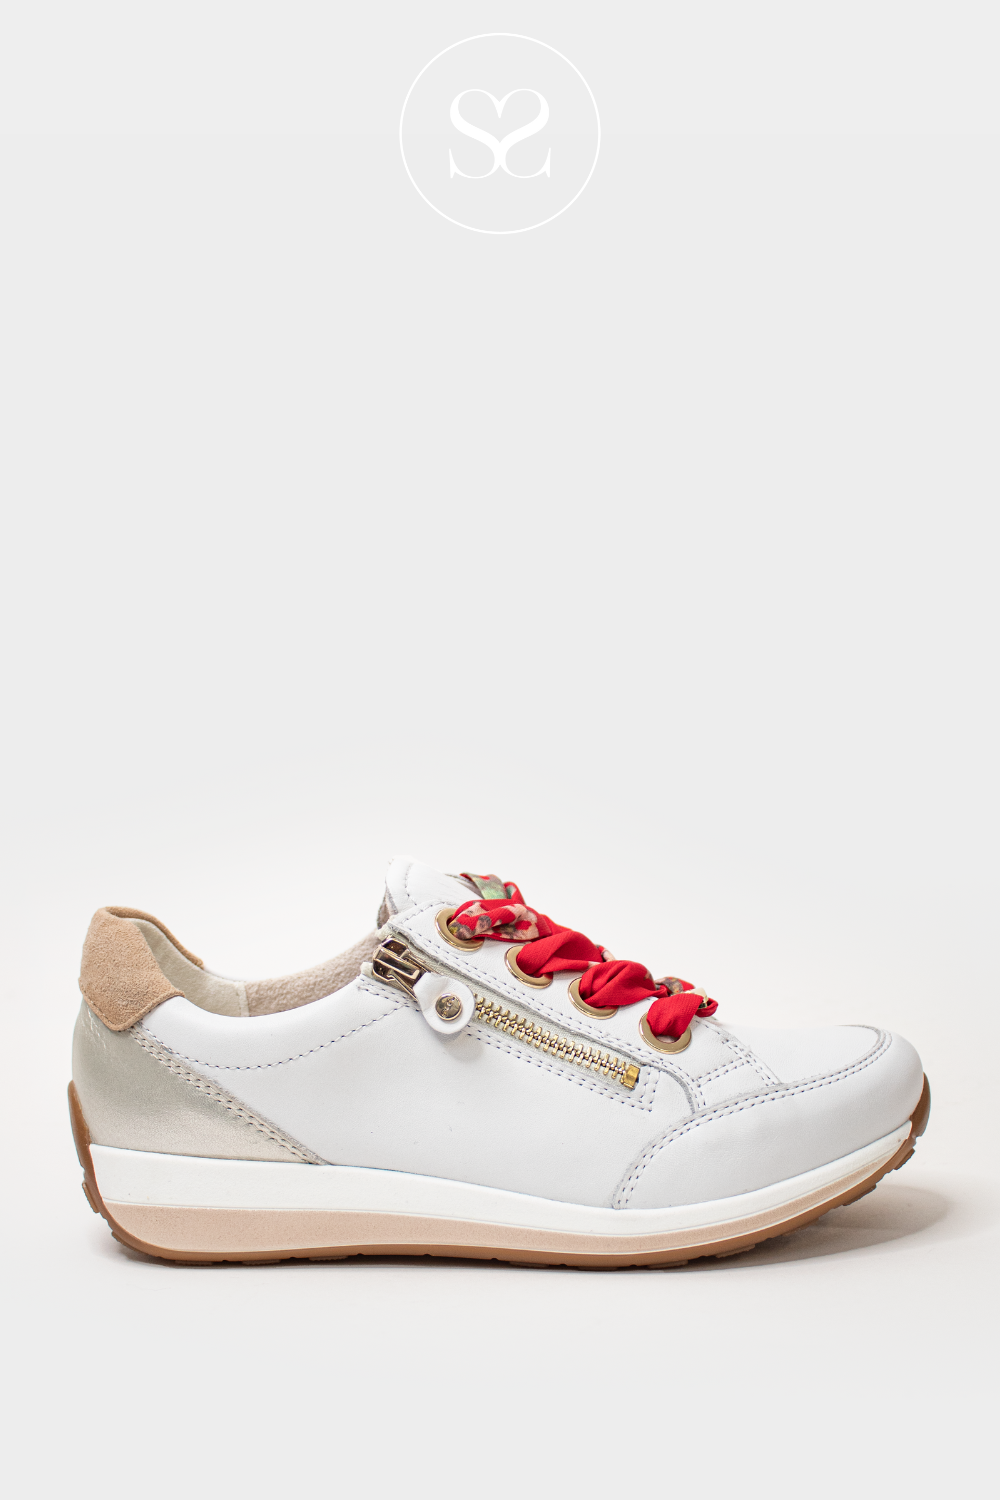 ARA 12_34587_79 WHITE LEATHER TRAINERS WITH SILVER HEEL, LACES AND SIDE ZIP. HAS AN INTERCHANGEABLE RED FLORAL LACE